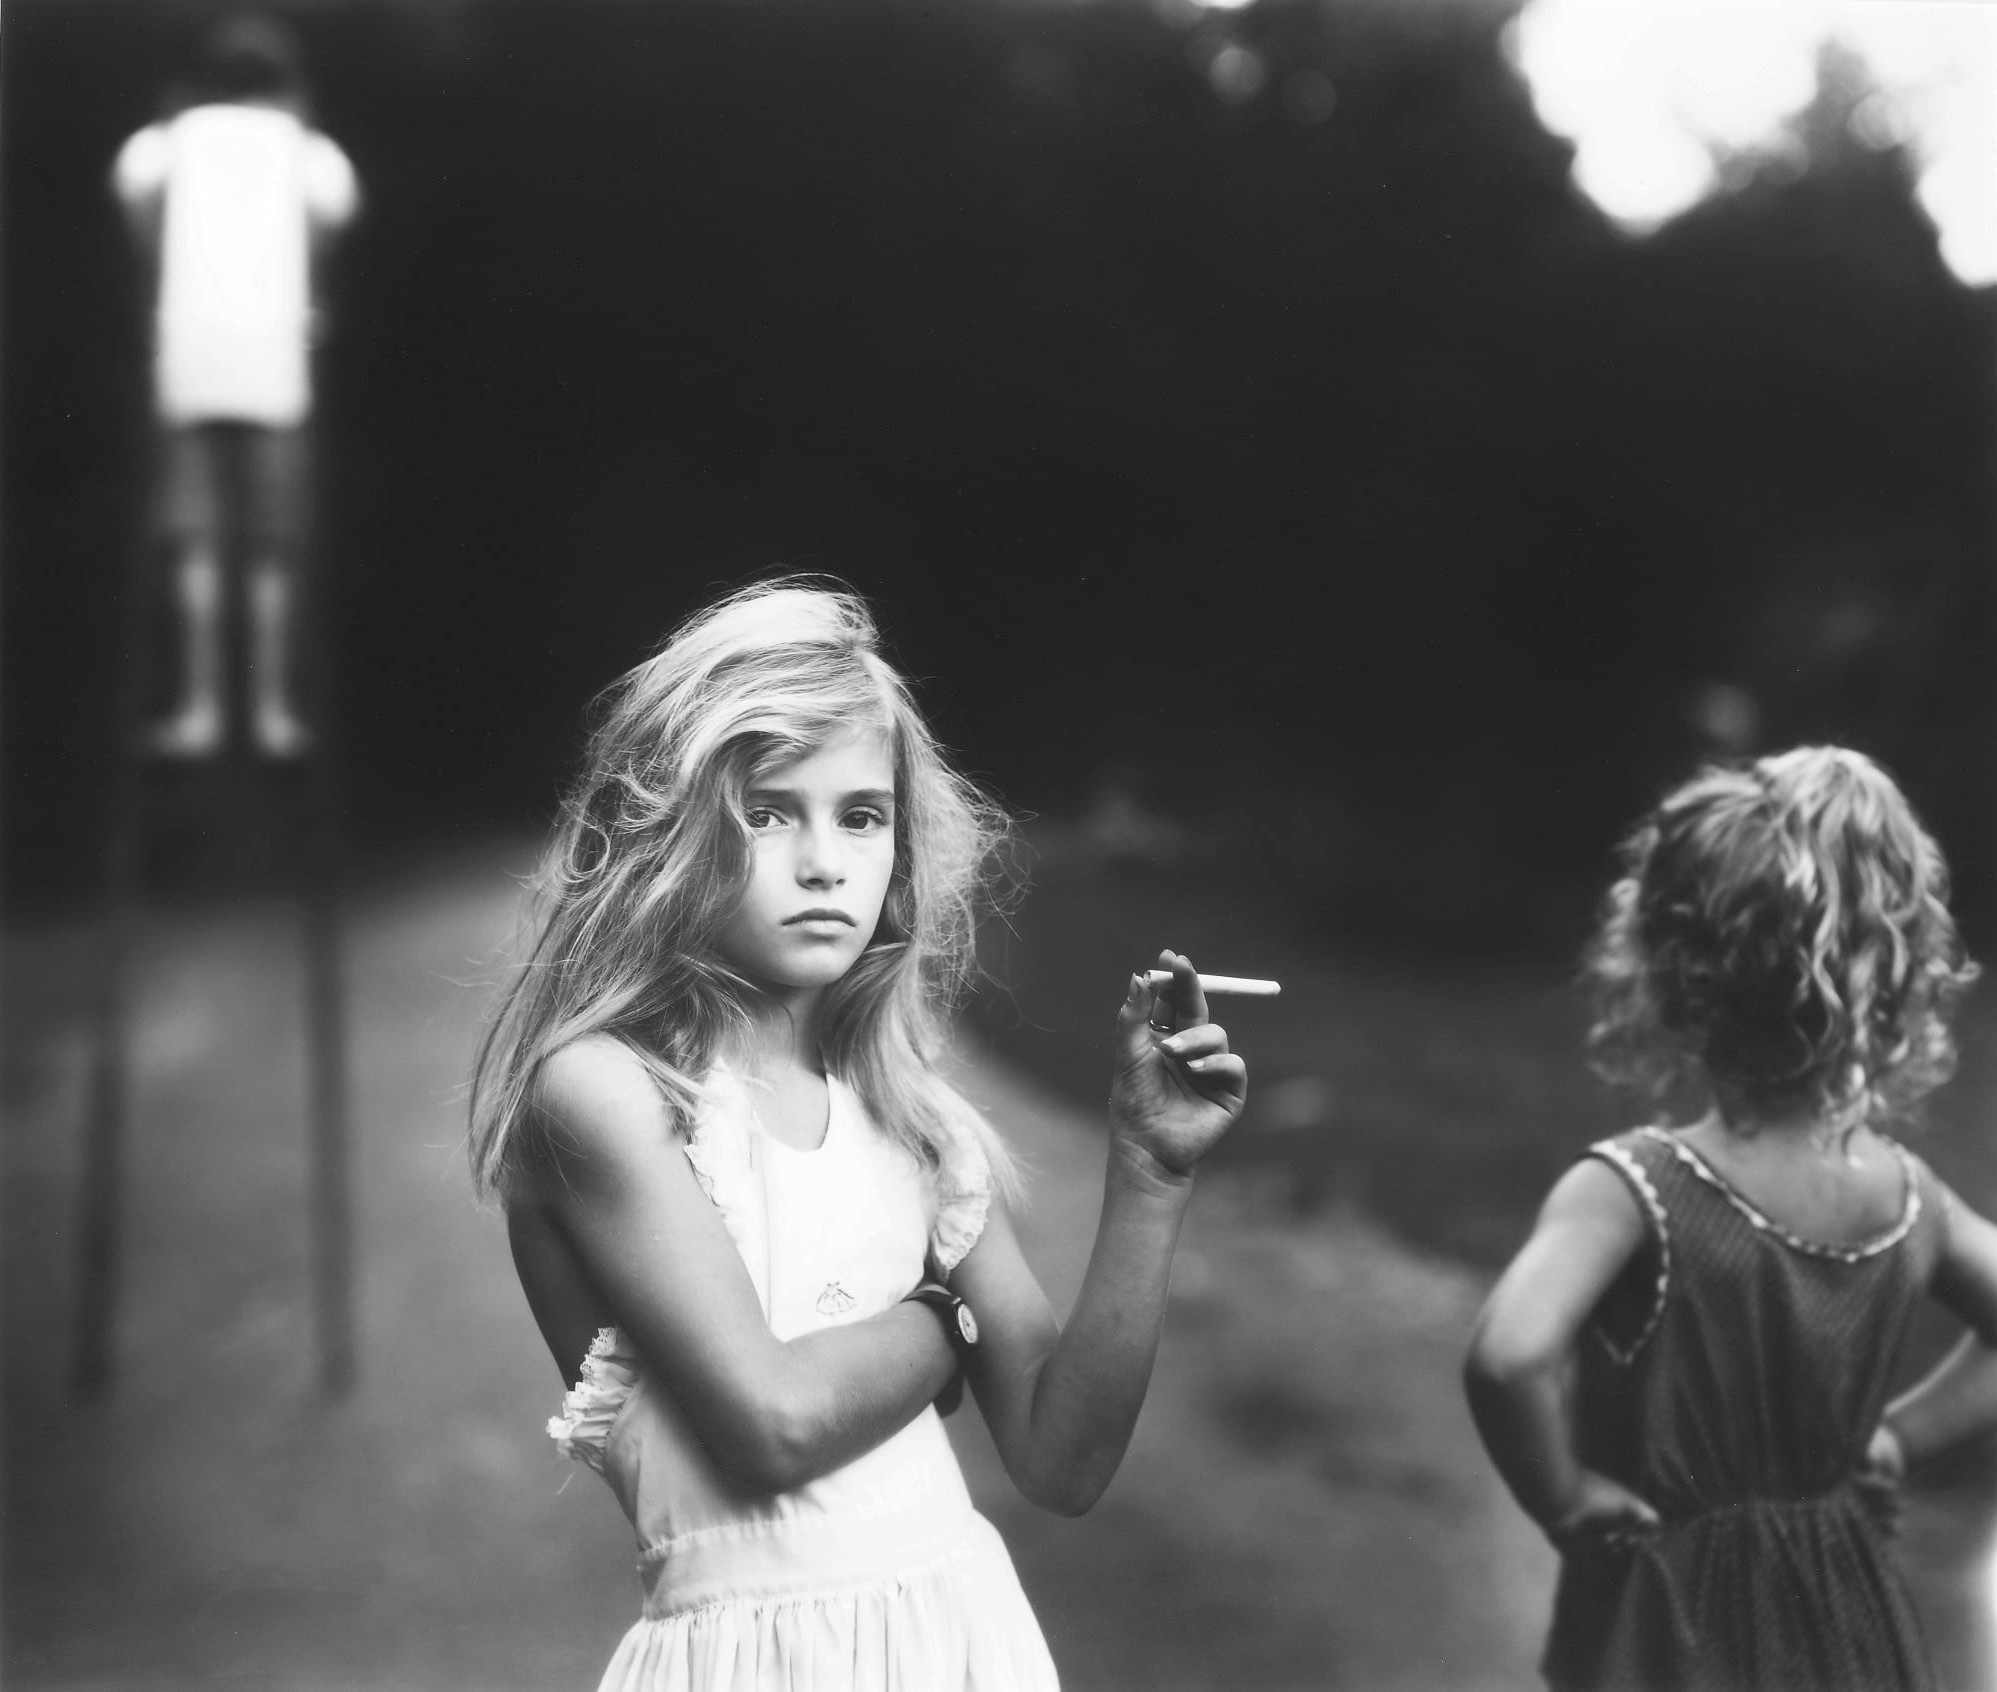 Why was Sally Mann's Immediate Family so controversial?